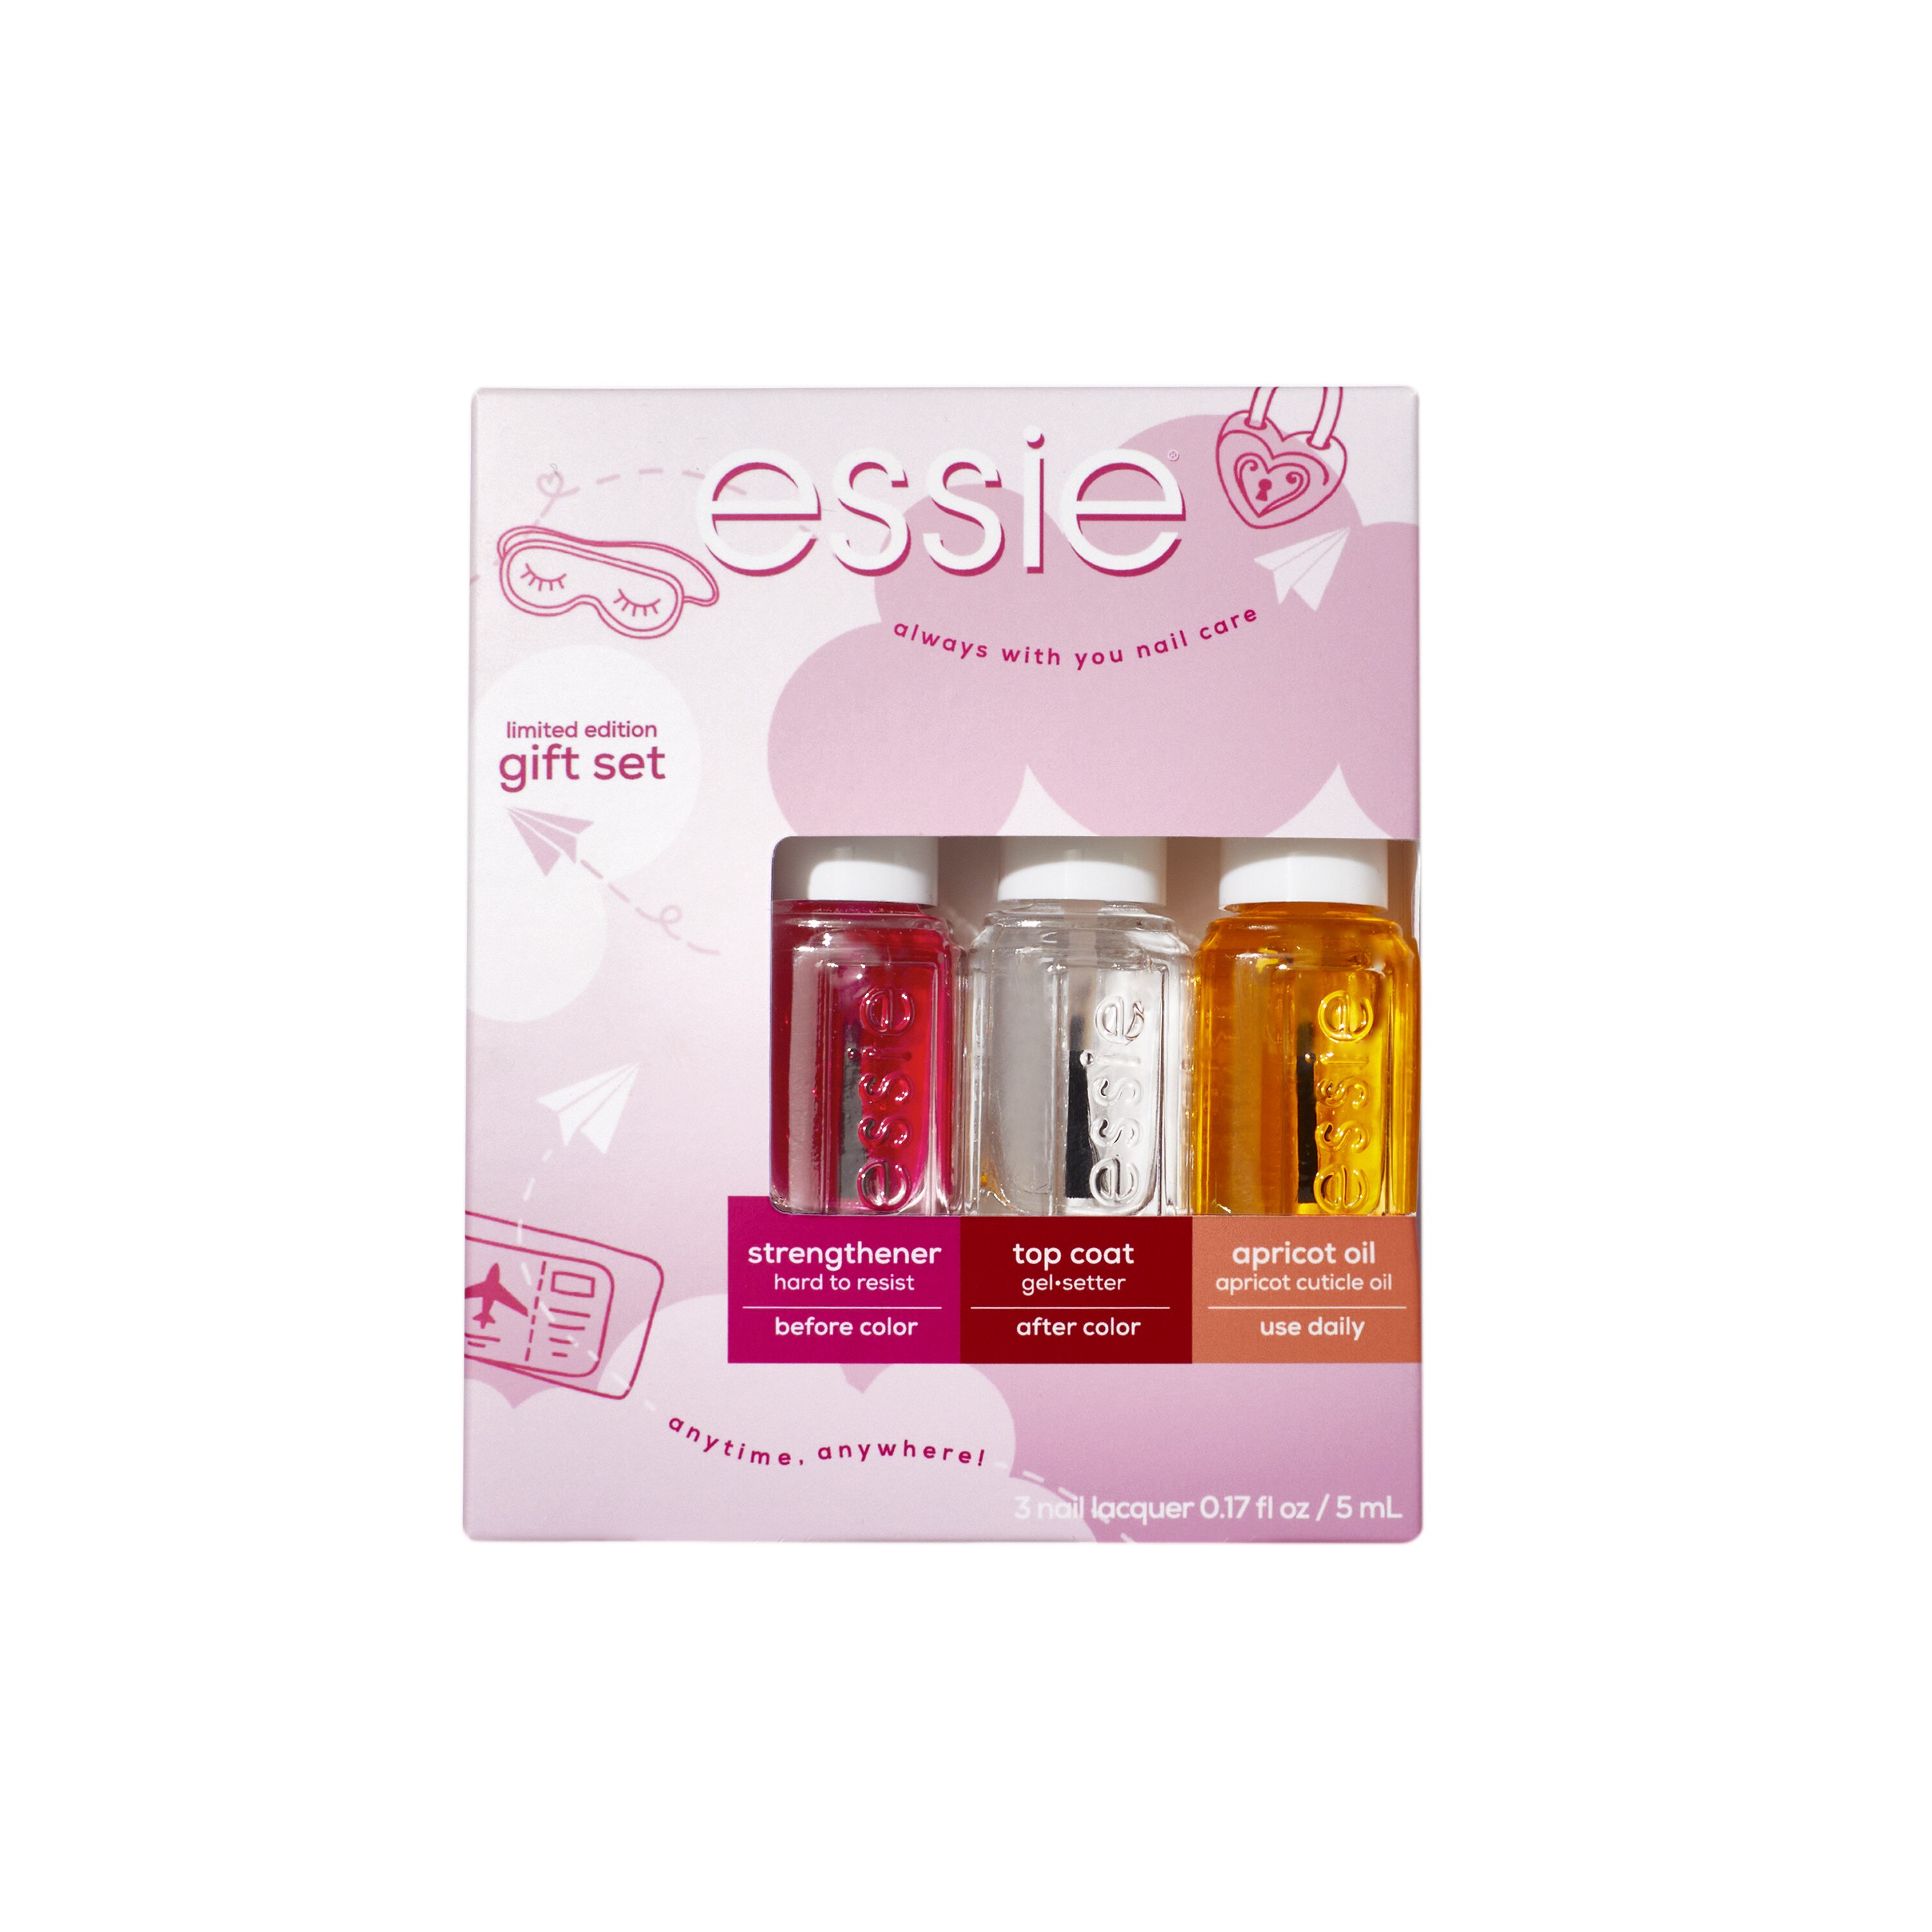 essie Salon-Quality Nail Care, Vegan, always with you nail care essentials (3-Piece Kit)